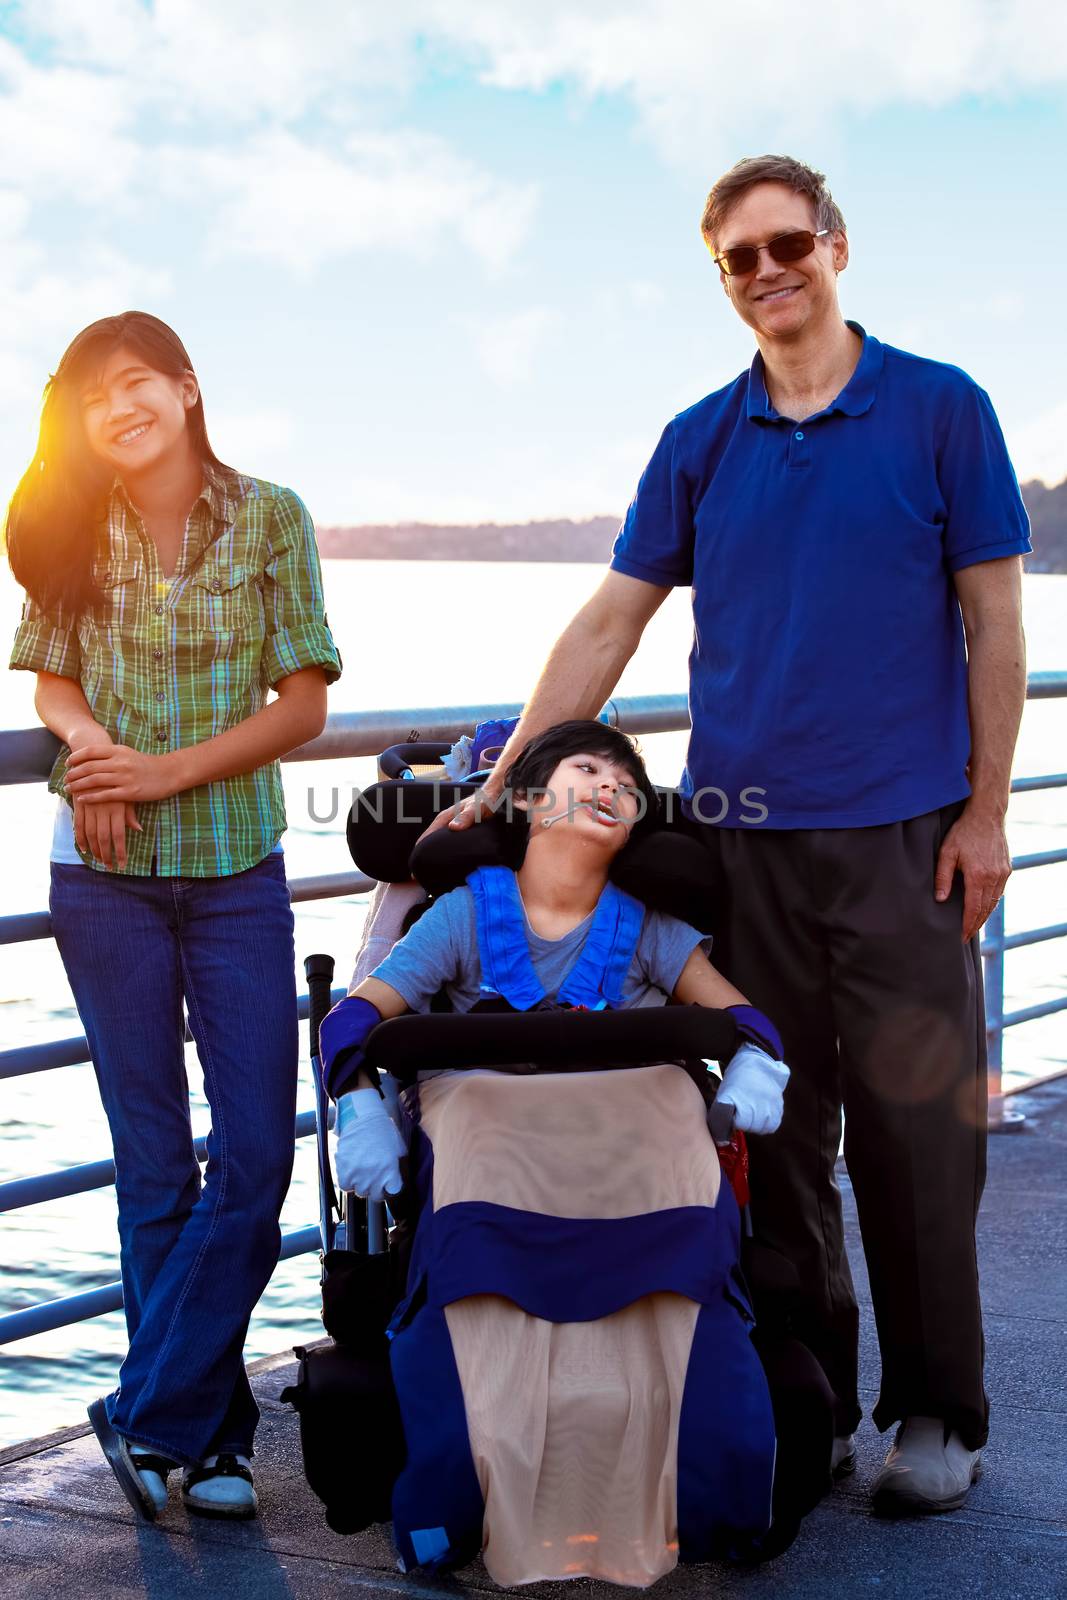 Disabled biracial child in wheelchair outdoors by lake with family. he has cerebral palsy.